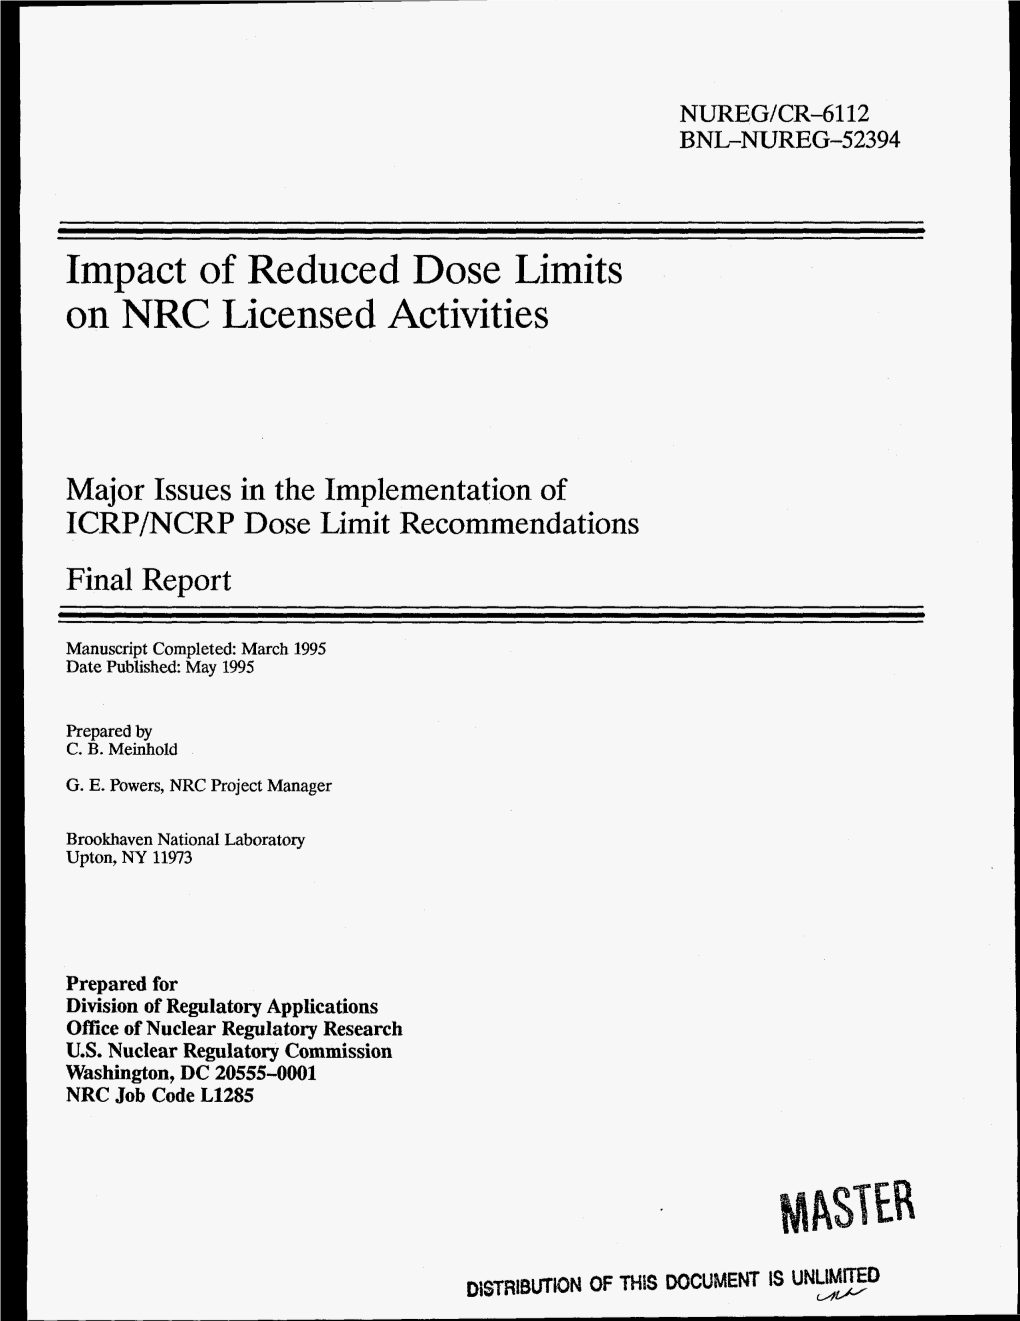 NUREG/CR-6112, "Impact of Reduced Dose Limits on NRC Licensed